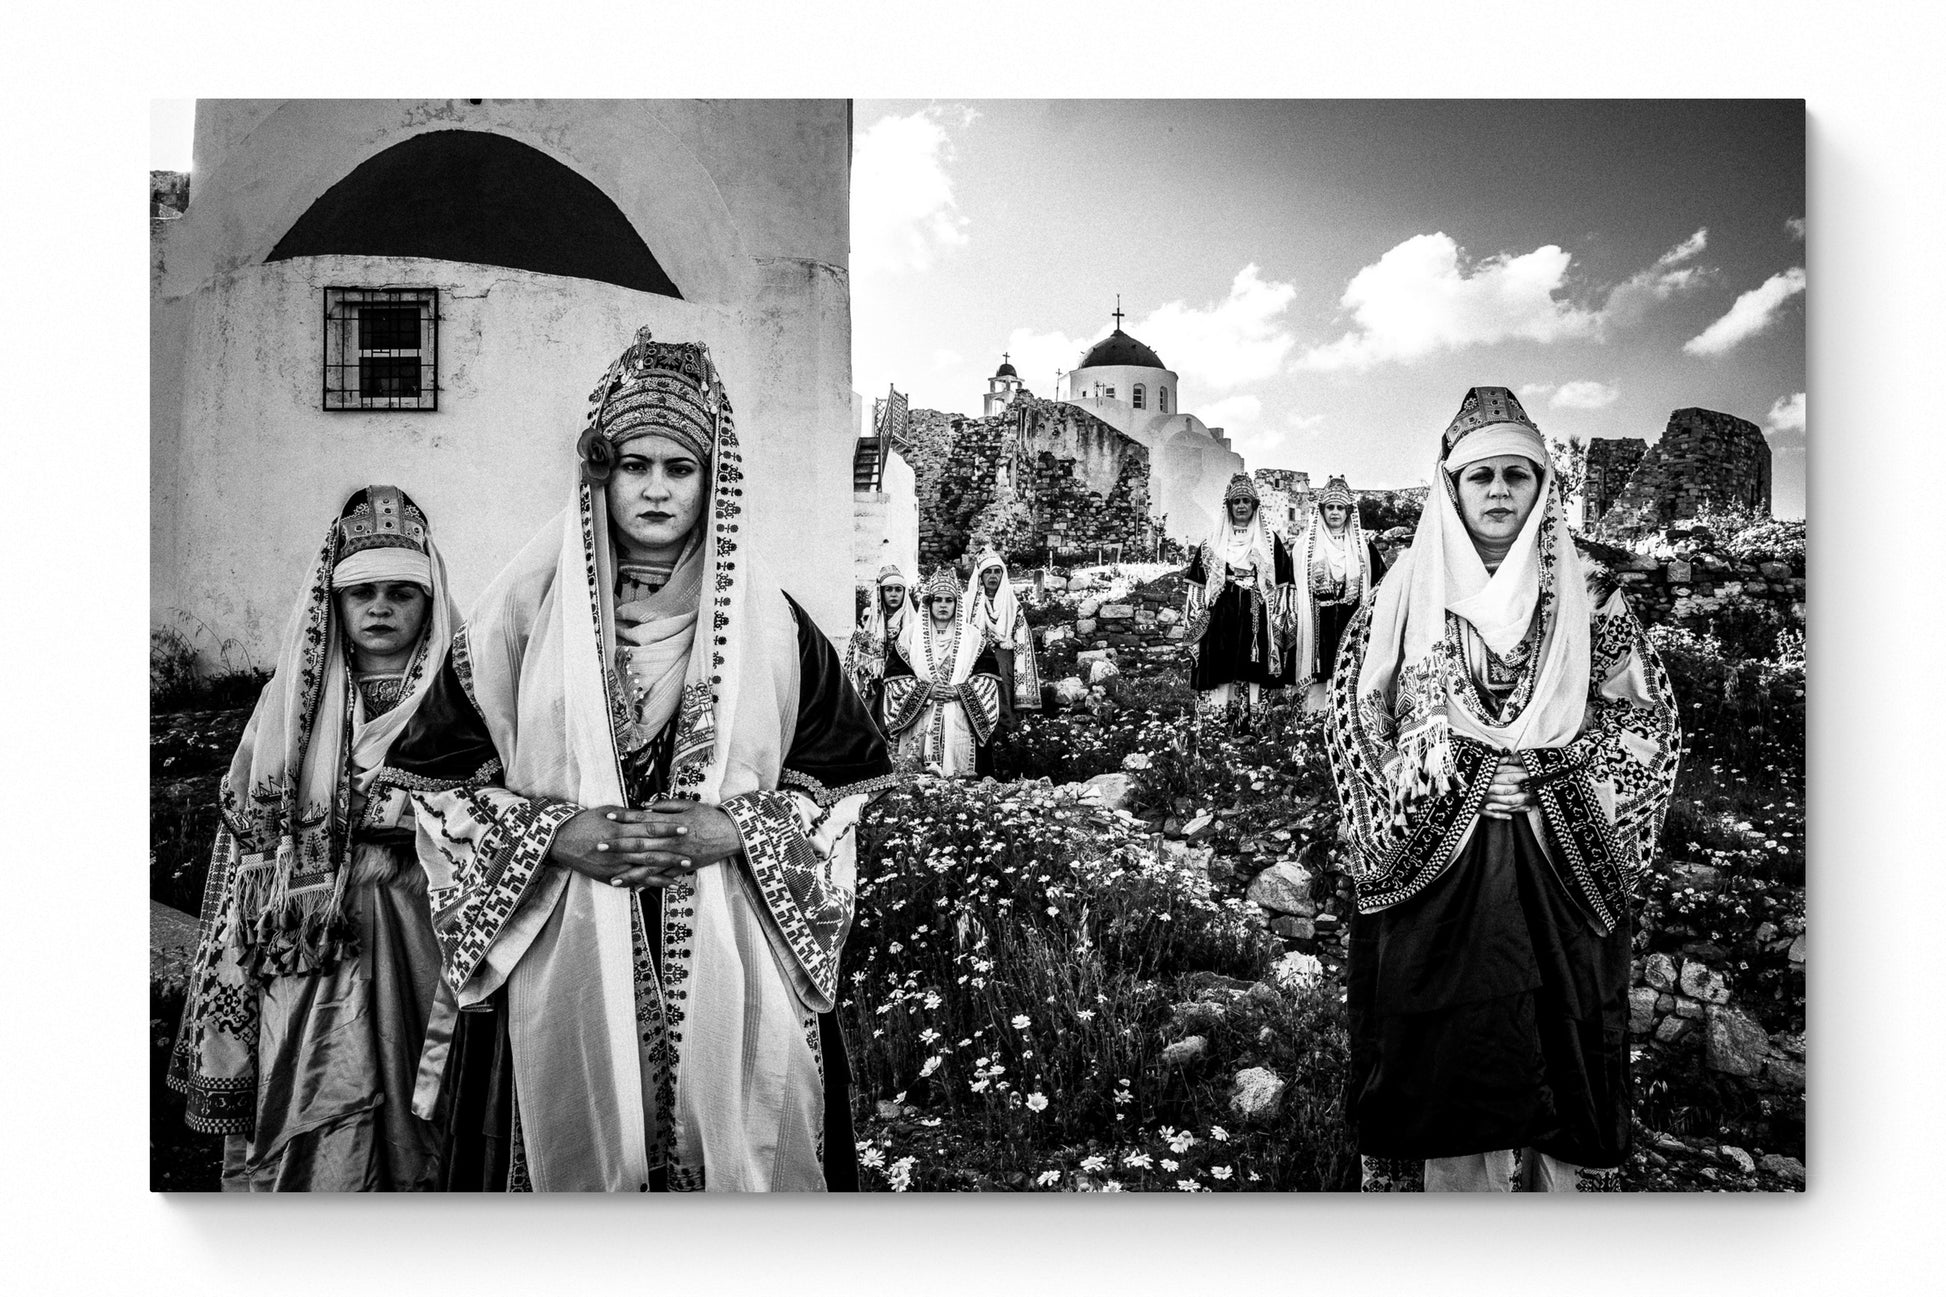 Black and White Photography Wall Art Greece | Costume of Astypalaea inside the castle Dodecanese Greece by George Tatakis - whole photo